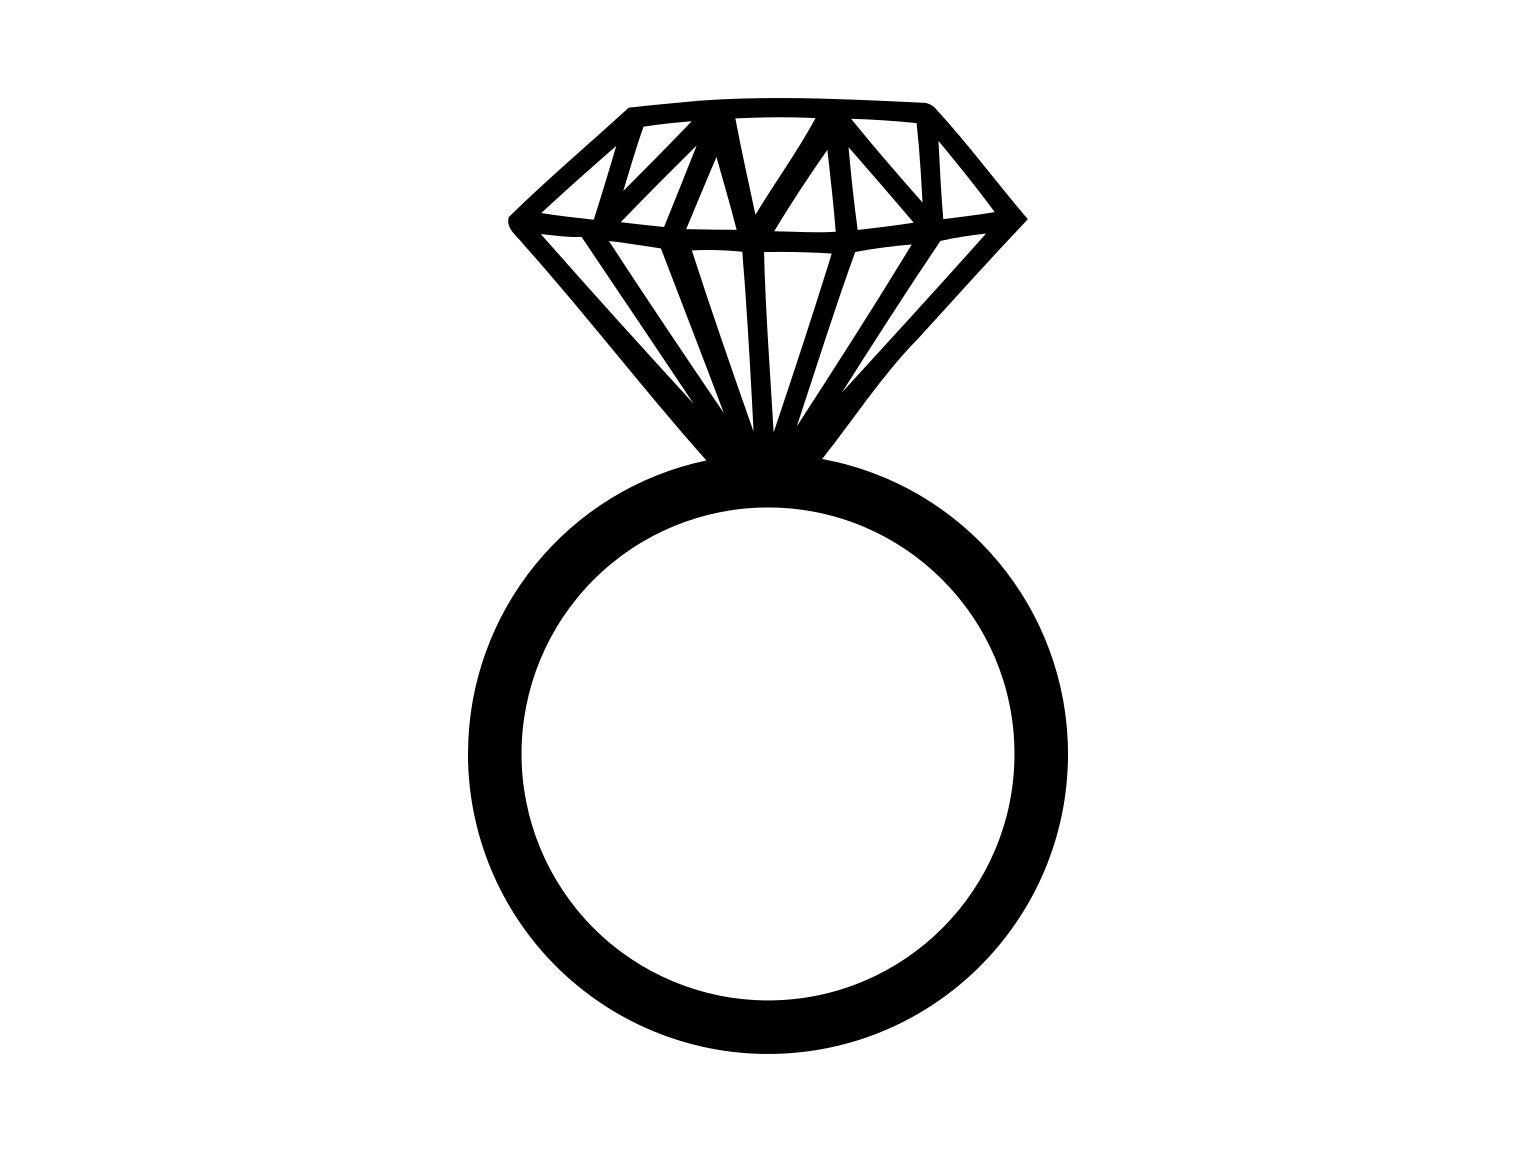  Diamond  Ring  Svg Silhouette Cutting File Clipart  